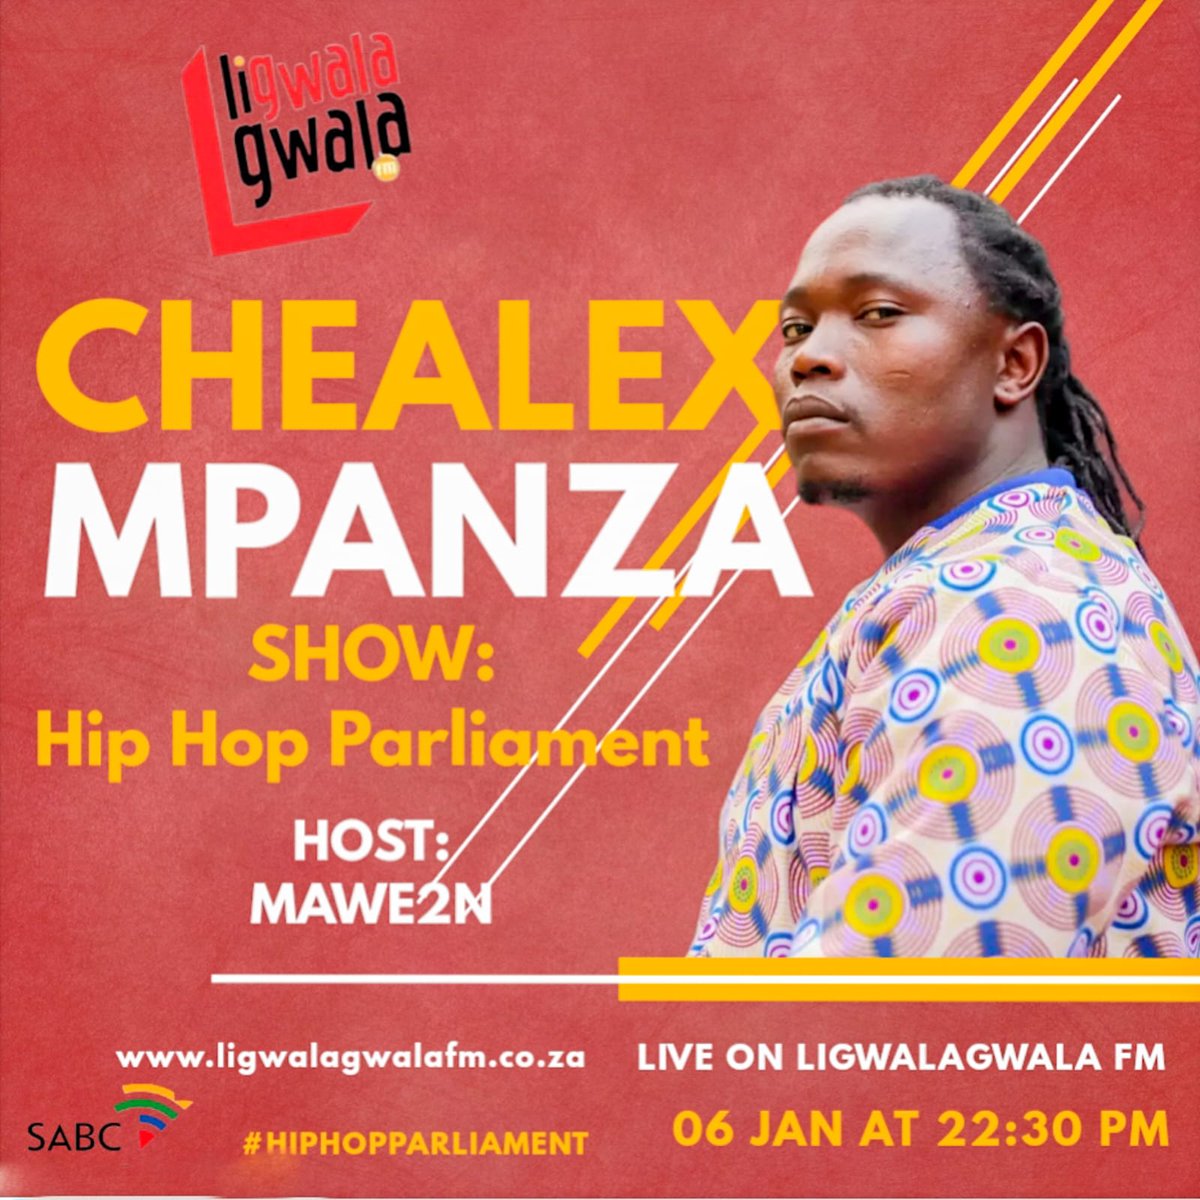 Family I hope you good. God has done it again, tonight we are on Ligwalagwala fm with Mawe2n #hiphopParliament make sure you tune in at 22:30